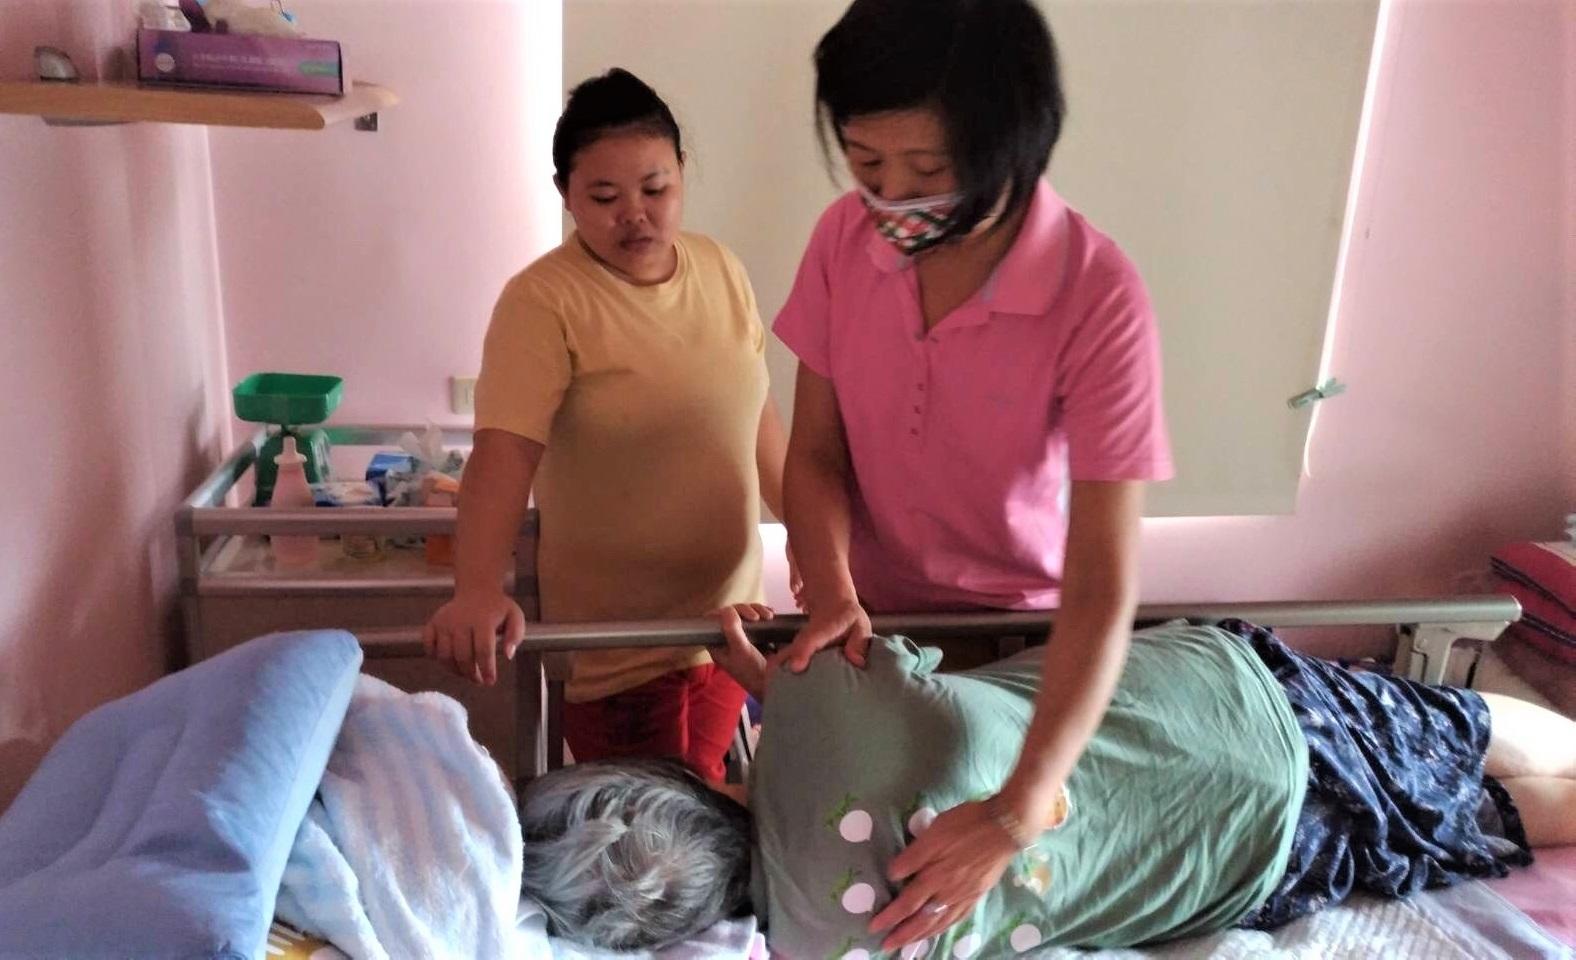 New Taipei City Government Offers Free Home-based Guidance on Nursing Skills to Improve the Quality of Nursing Care  Photo provided by New Taipei City Government